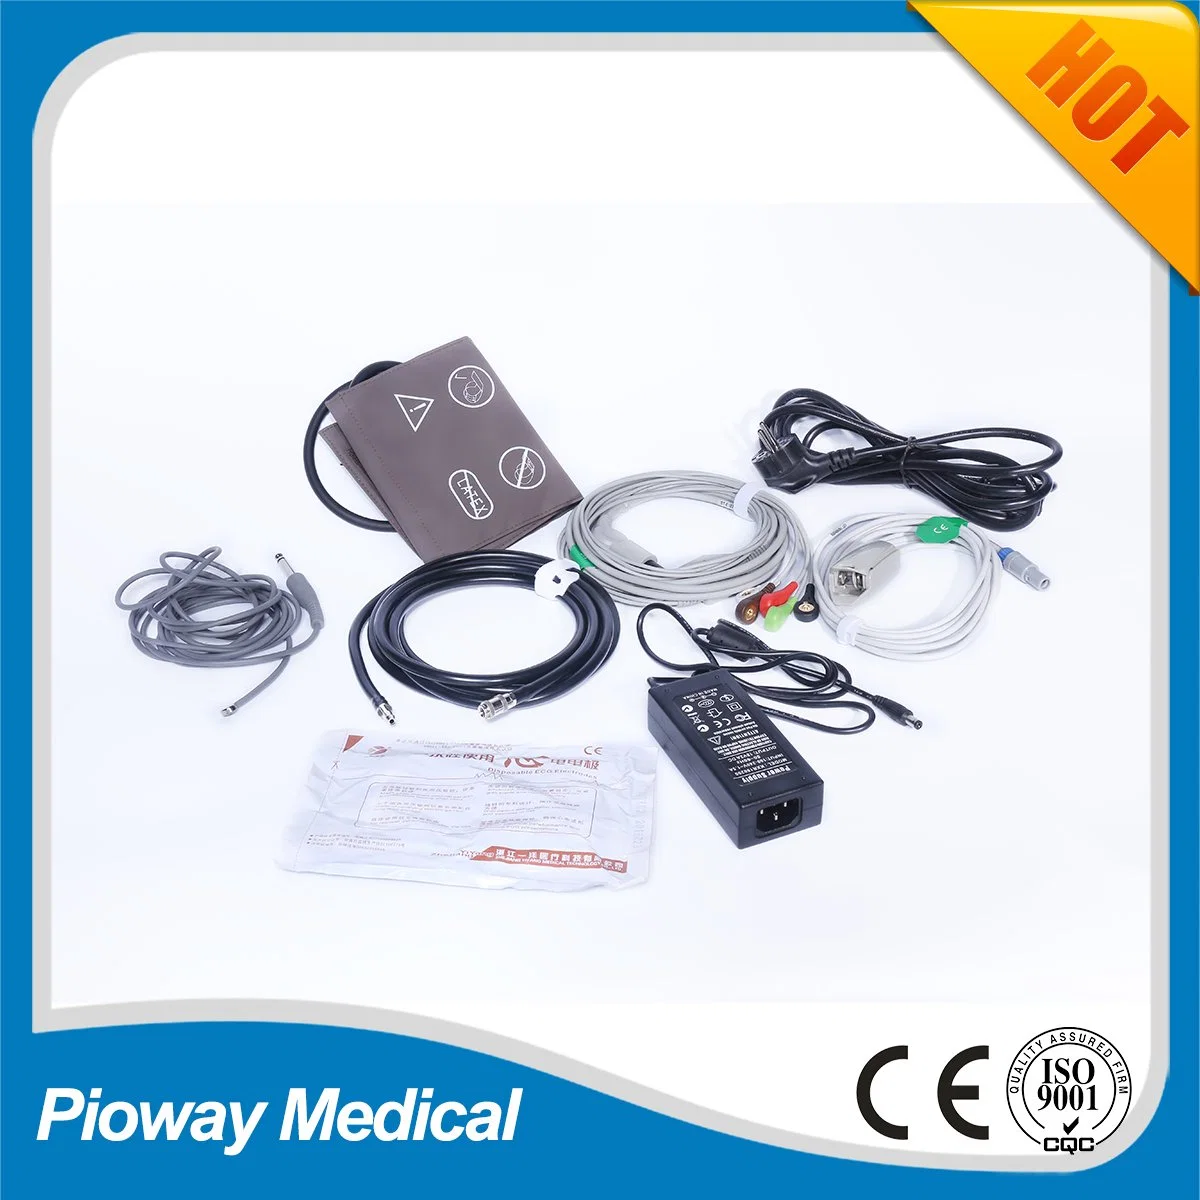 ICU Bedside Patient Monitor, Vital Signs Monitor (PW-405)